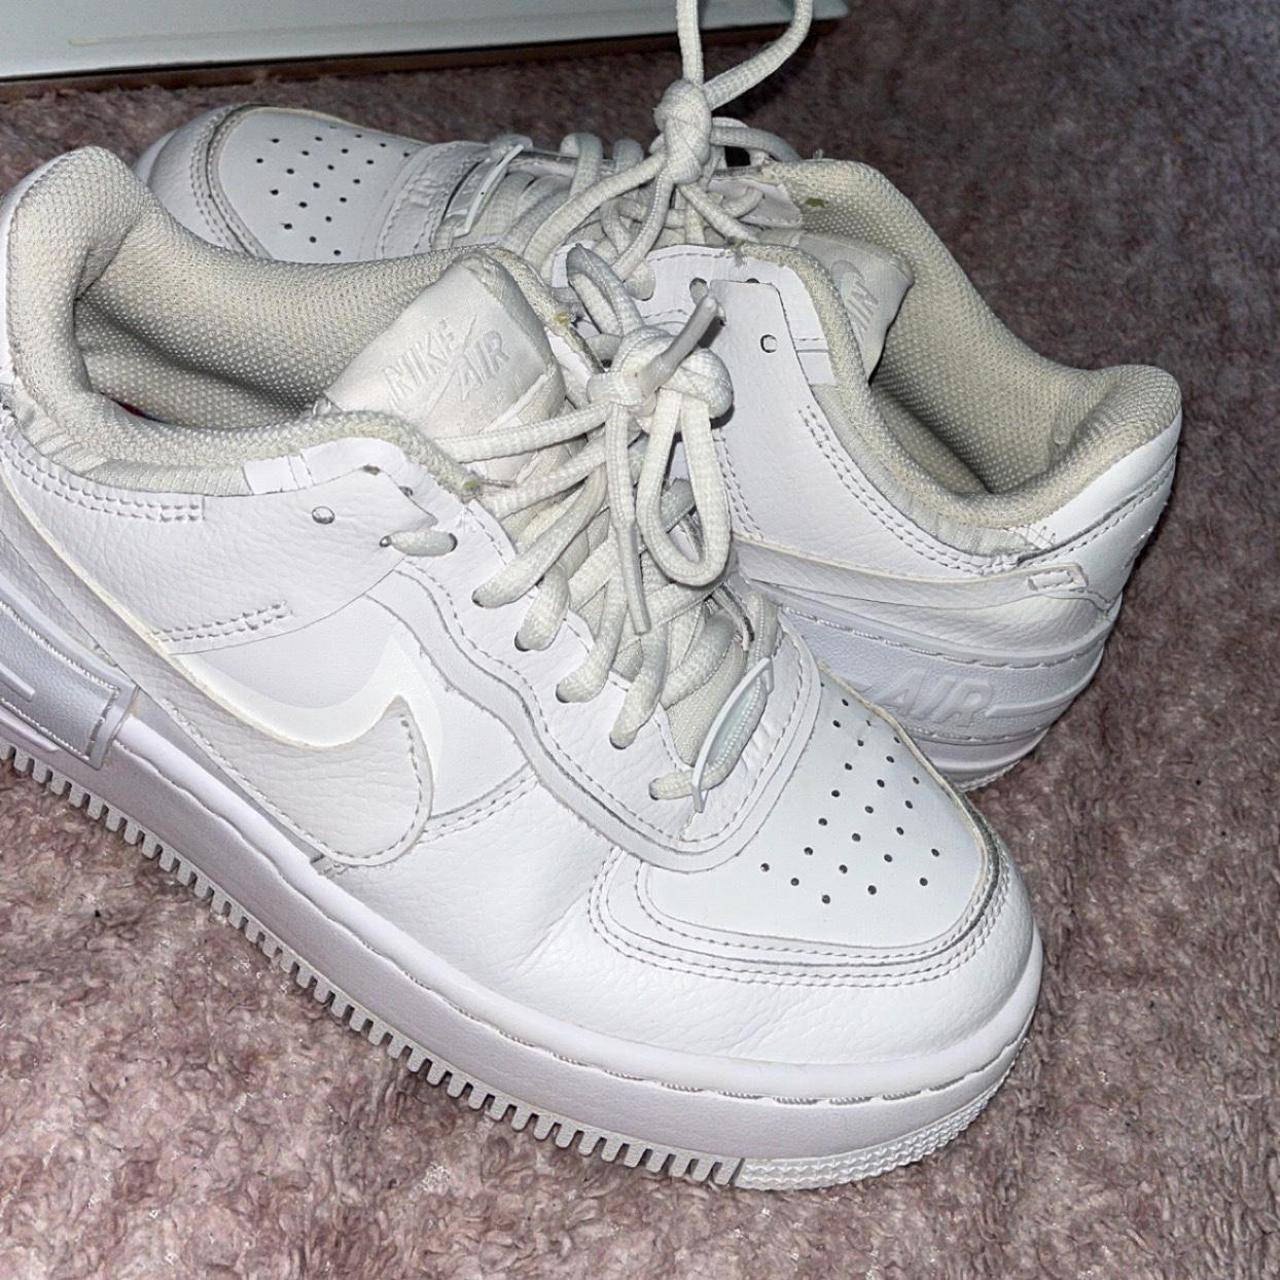 White Nike Airforces - Depop